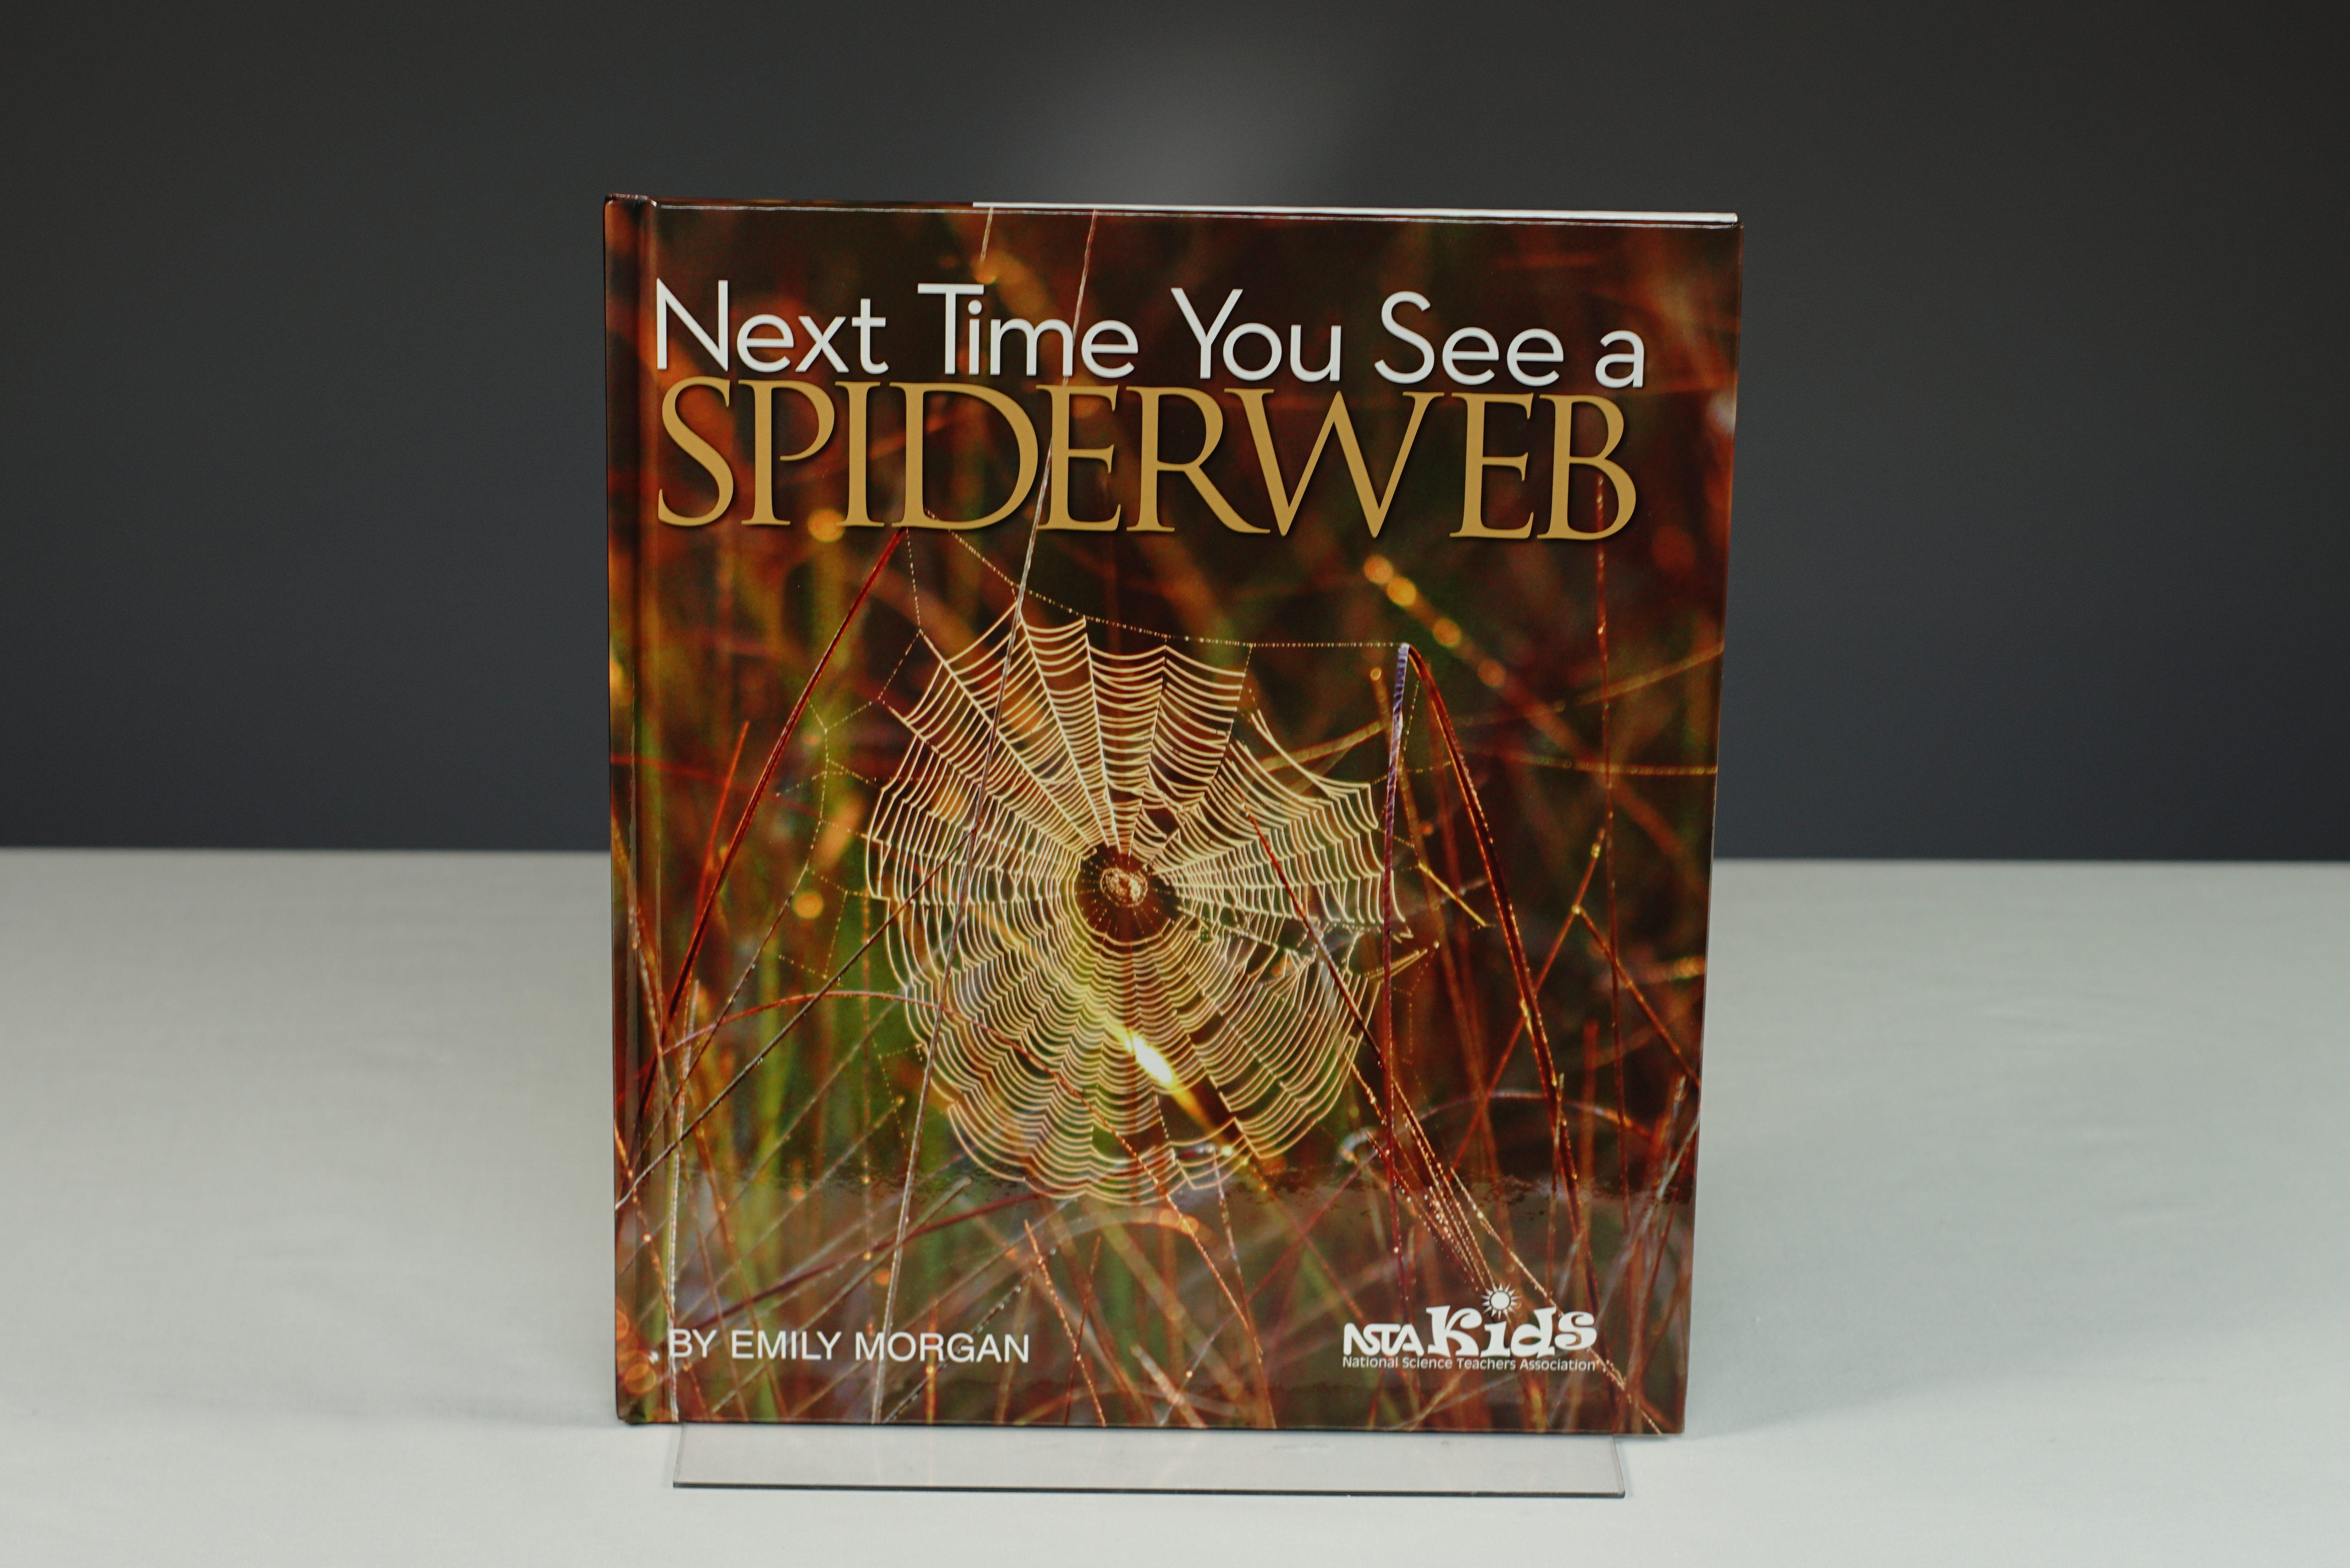 Next Time You See a Spider Web Book